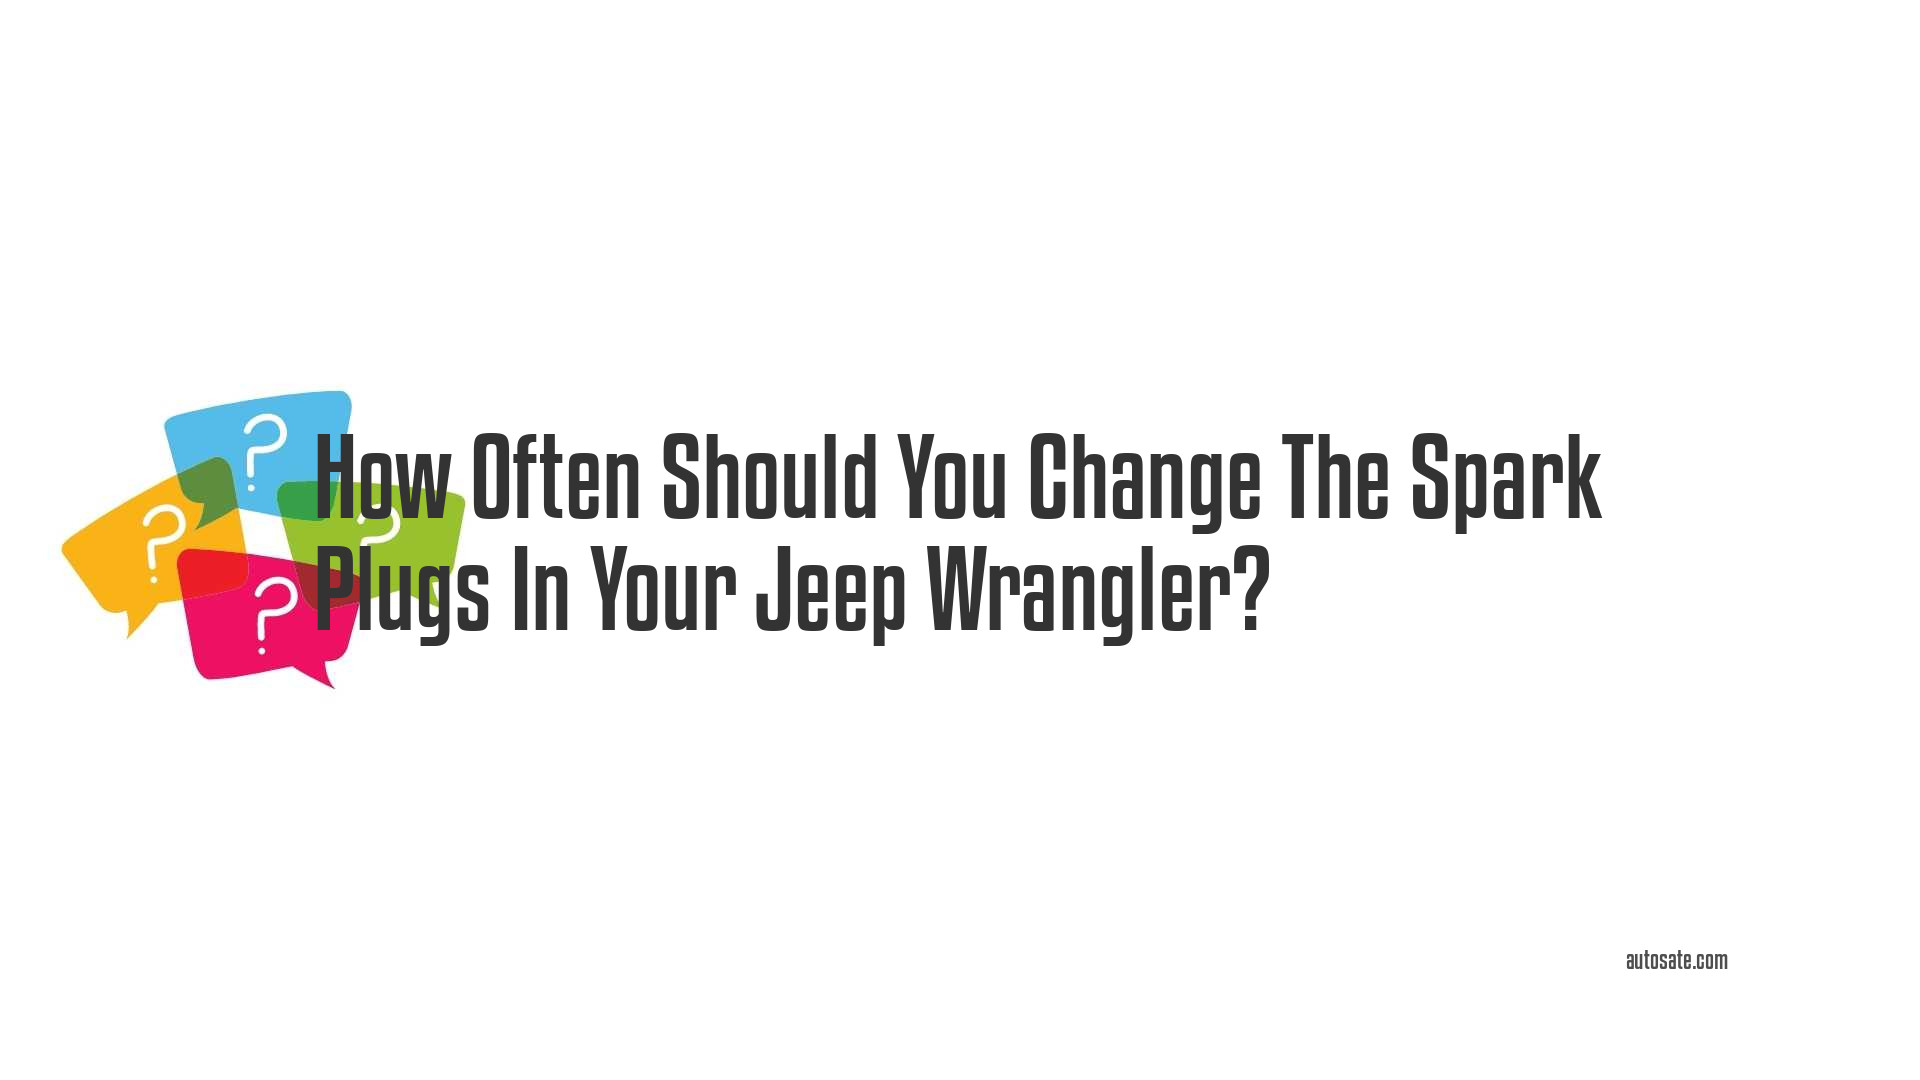 How Often Should You Change The Spark Plugs In Your Jeep Wrangler?